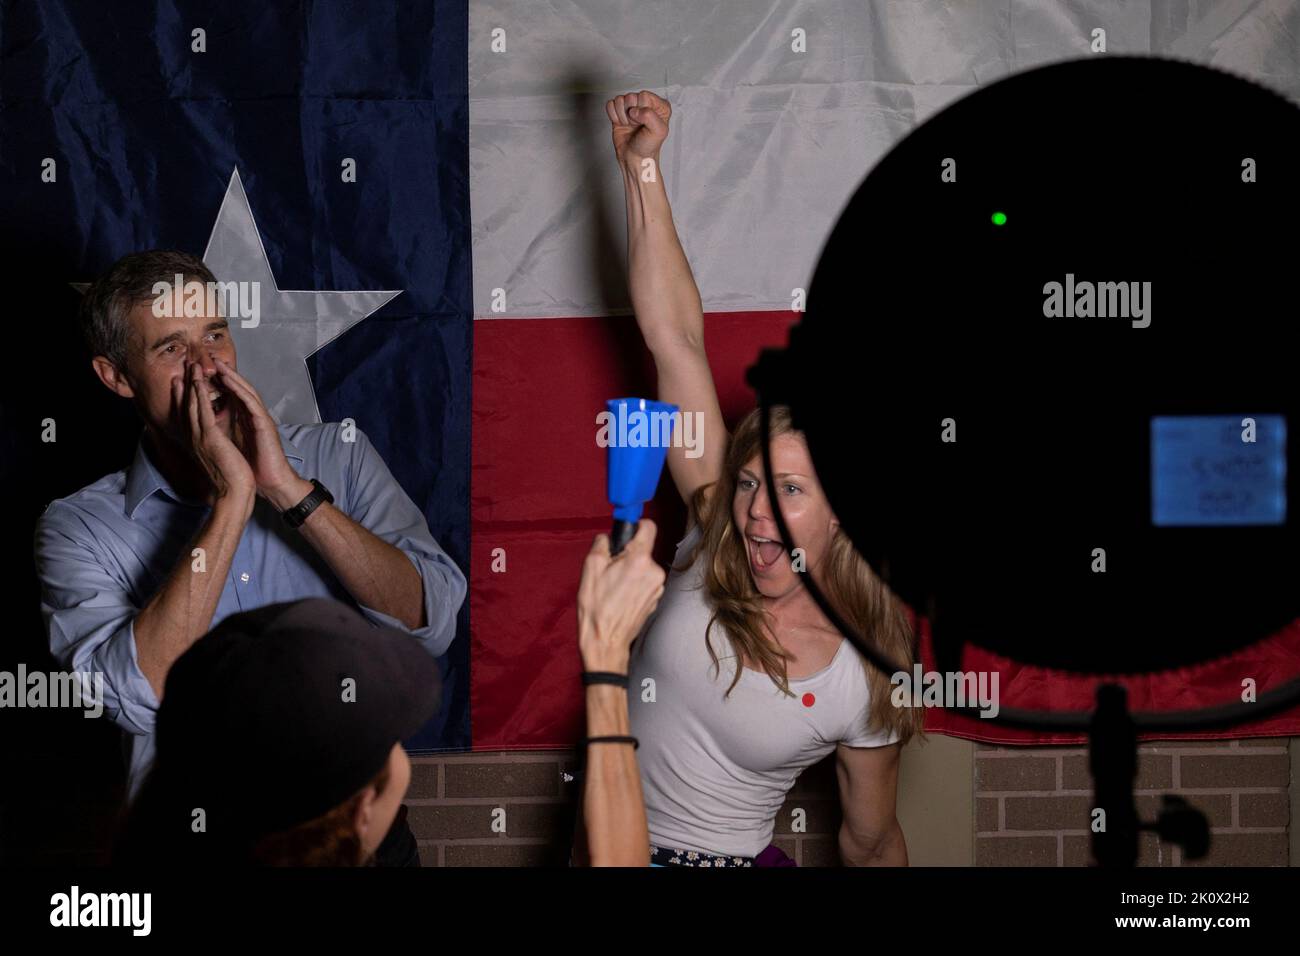 Marika Mohr, an American from Finland, raises her hand as Texas Democratic gubernatorial candidate and former U.S. congressman Beto O'Rourke shouts, 'First time voter,' before posing with supporters in front of the Texas state flag during a campaign event in Houston, Texas, U.S. September 13, 2022. REUTERS/Adrees Latif     TPX IMAGES OF THE DAY Stock Photo